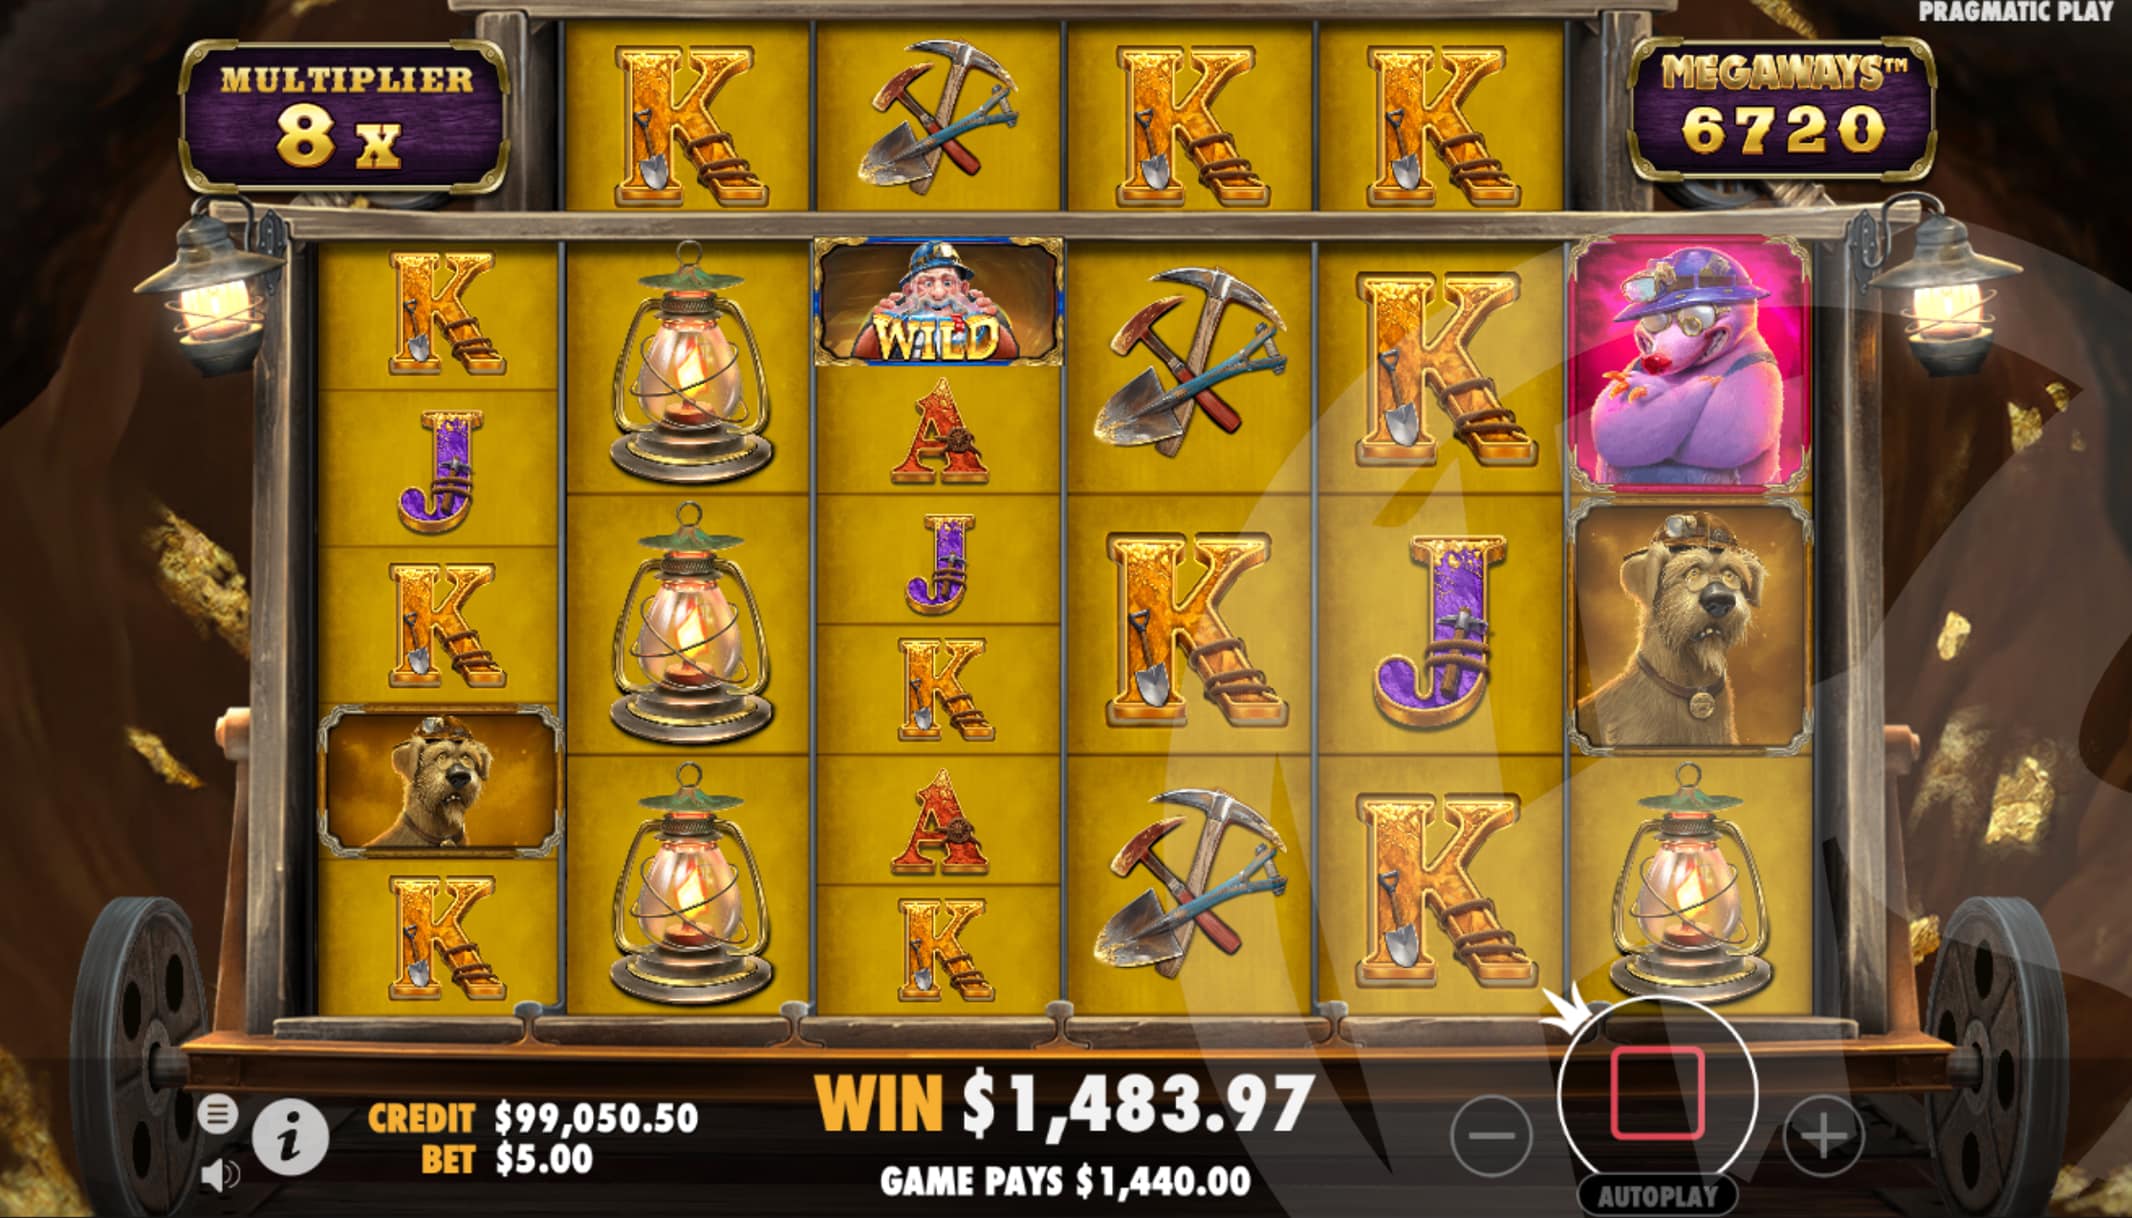 Win Multipliers Do Not Increase With Tumbles, But Can Increase With Multipliers